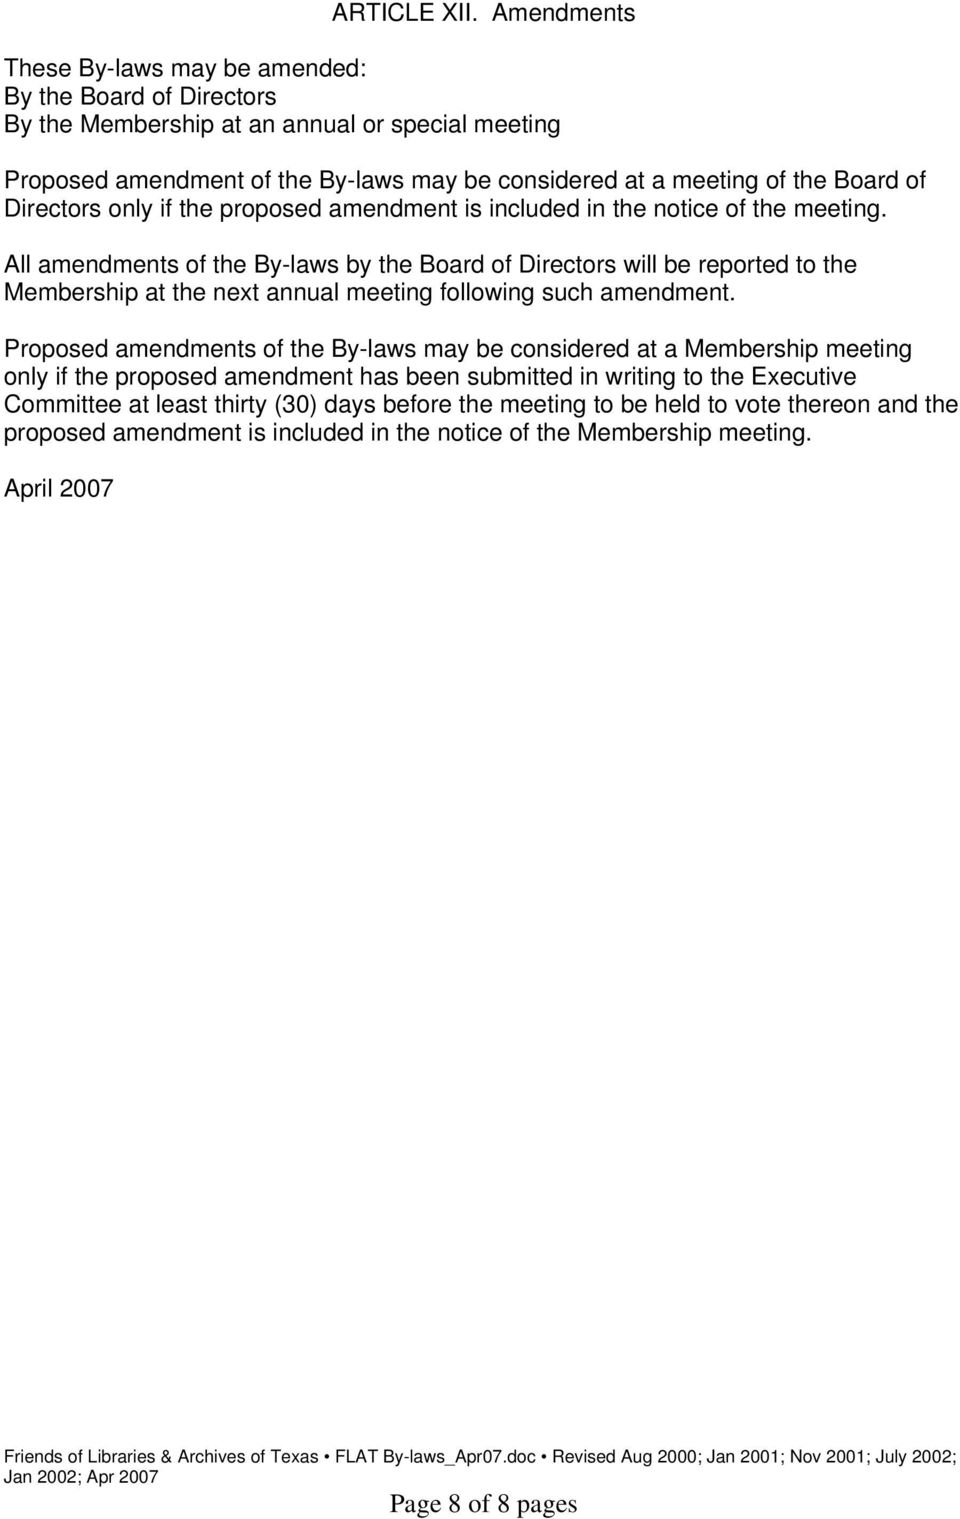 of Directors only if the proposed amendment is included in the notice of the meeting.